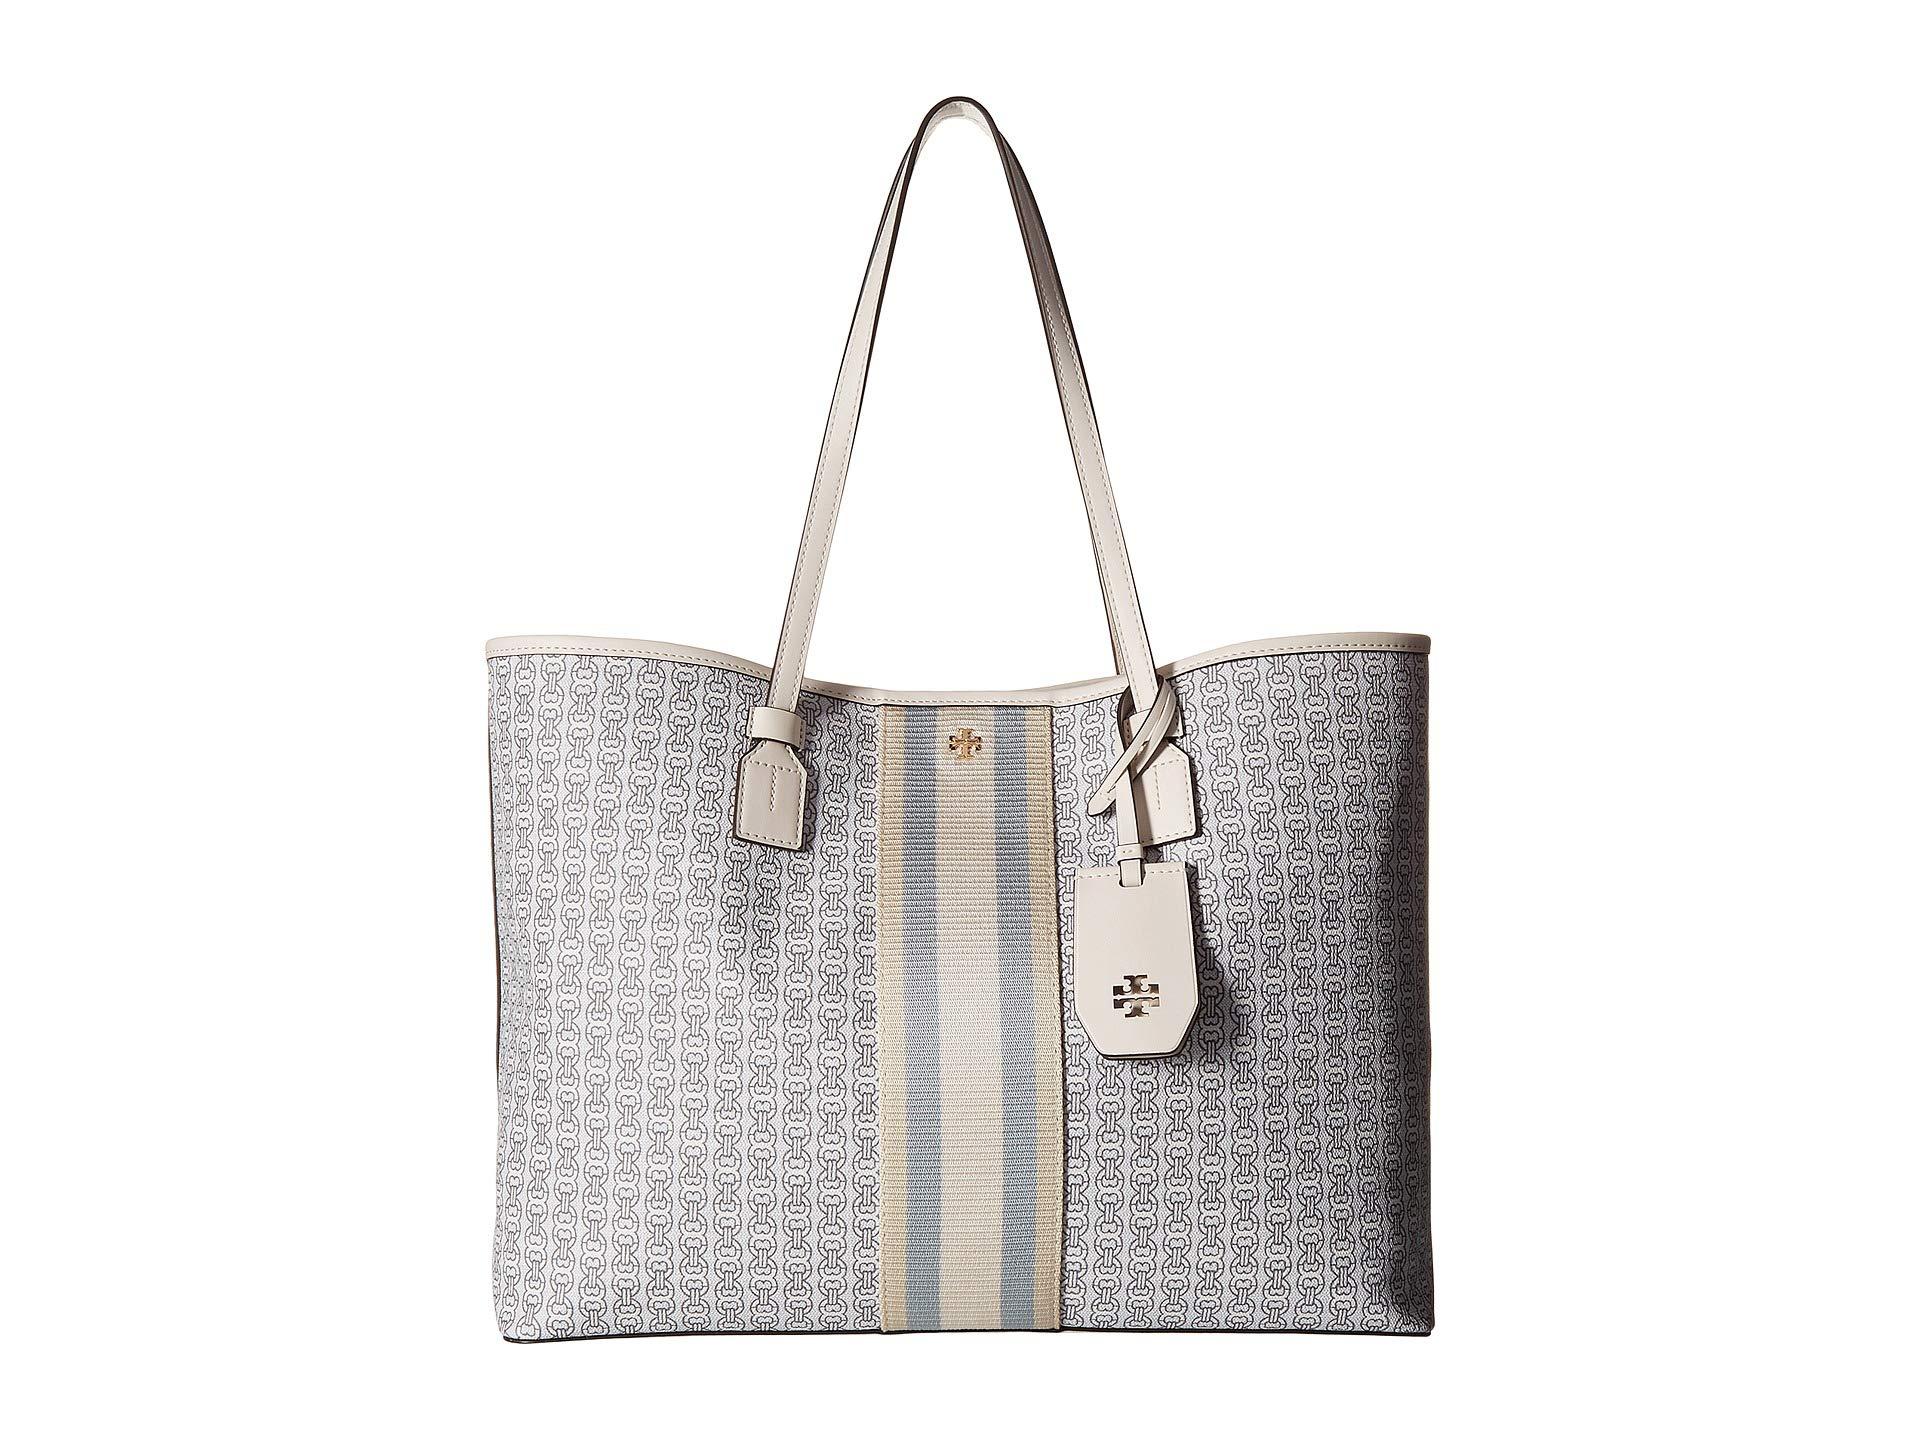 Lyst - Tory Burch Gemini Link Canvas Tote (new Ivory) Handbags in White